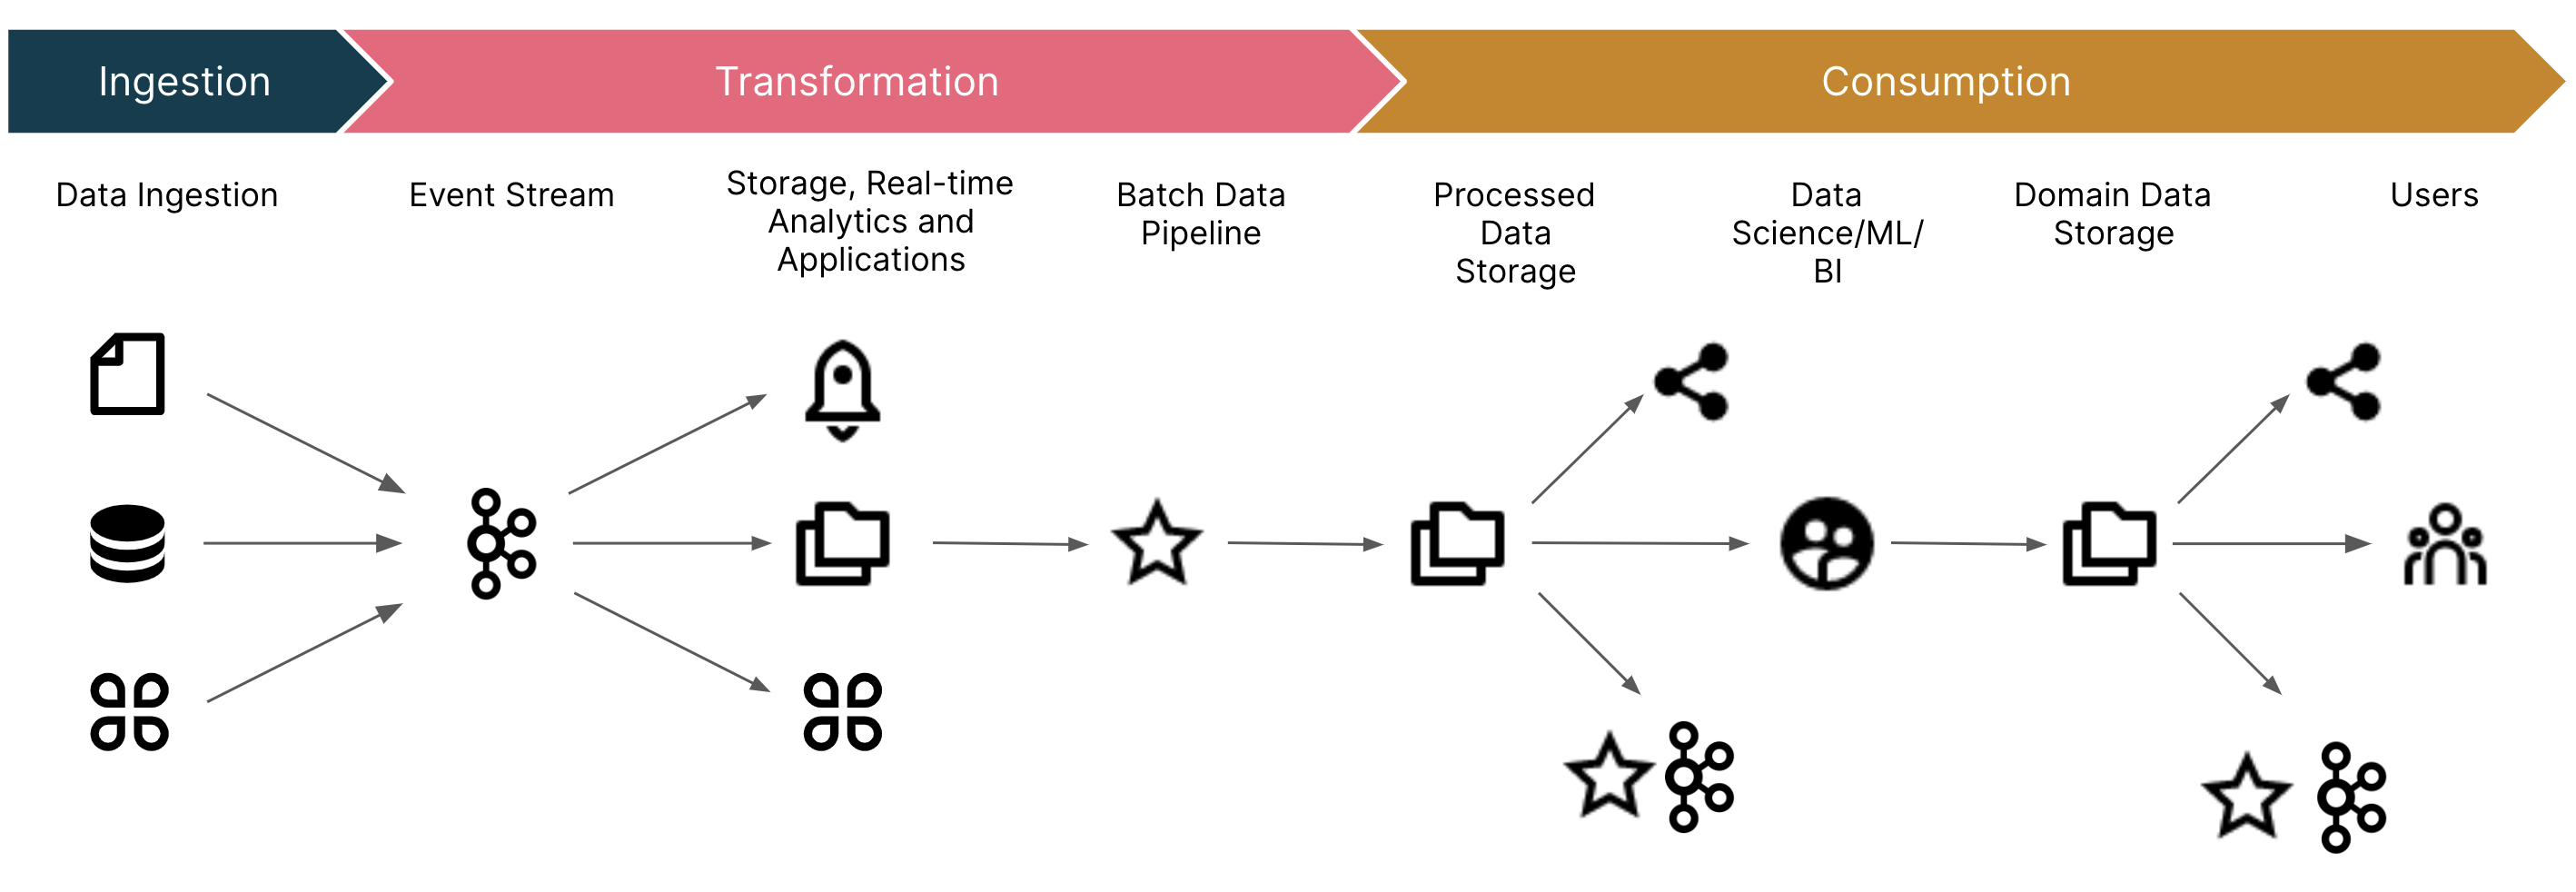 A series of steps across the ingestion, transformation and consumption phases that show how data gets processed and into the hands of users.